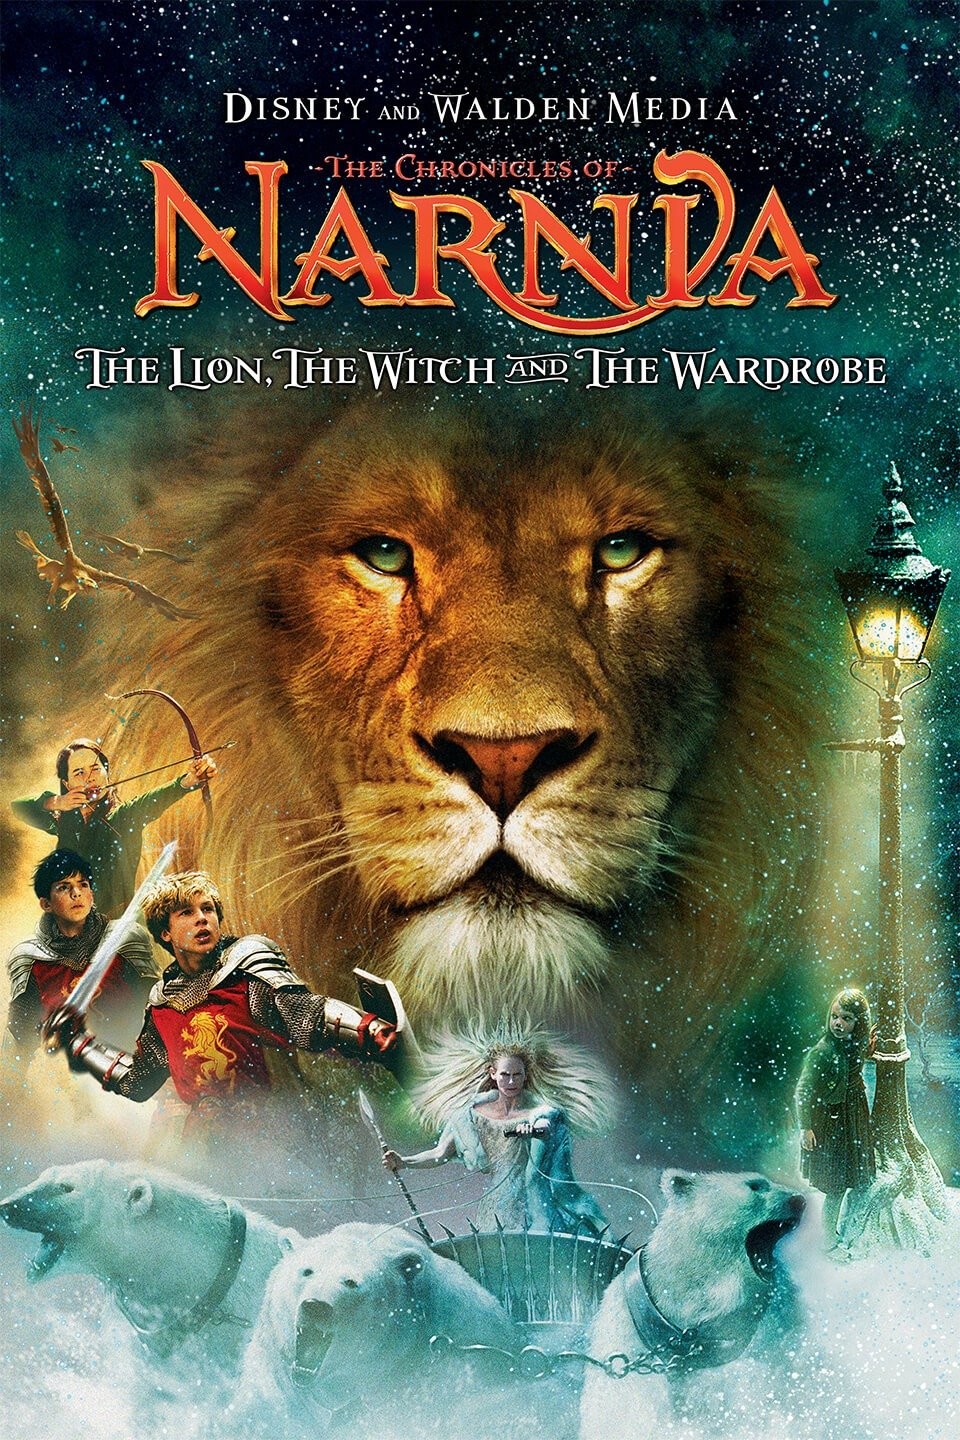 The Second Coming of Narnia